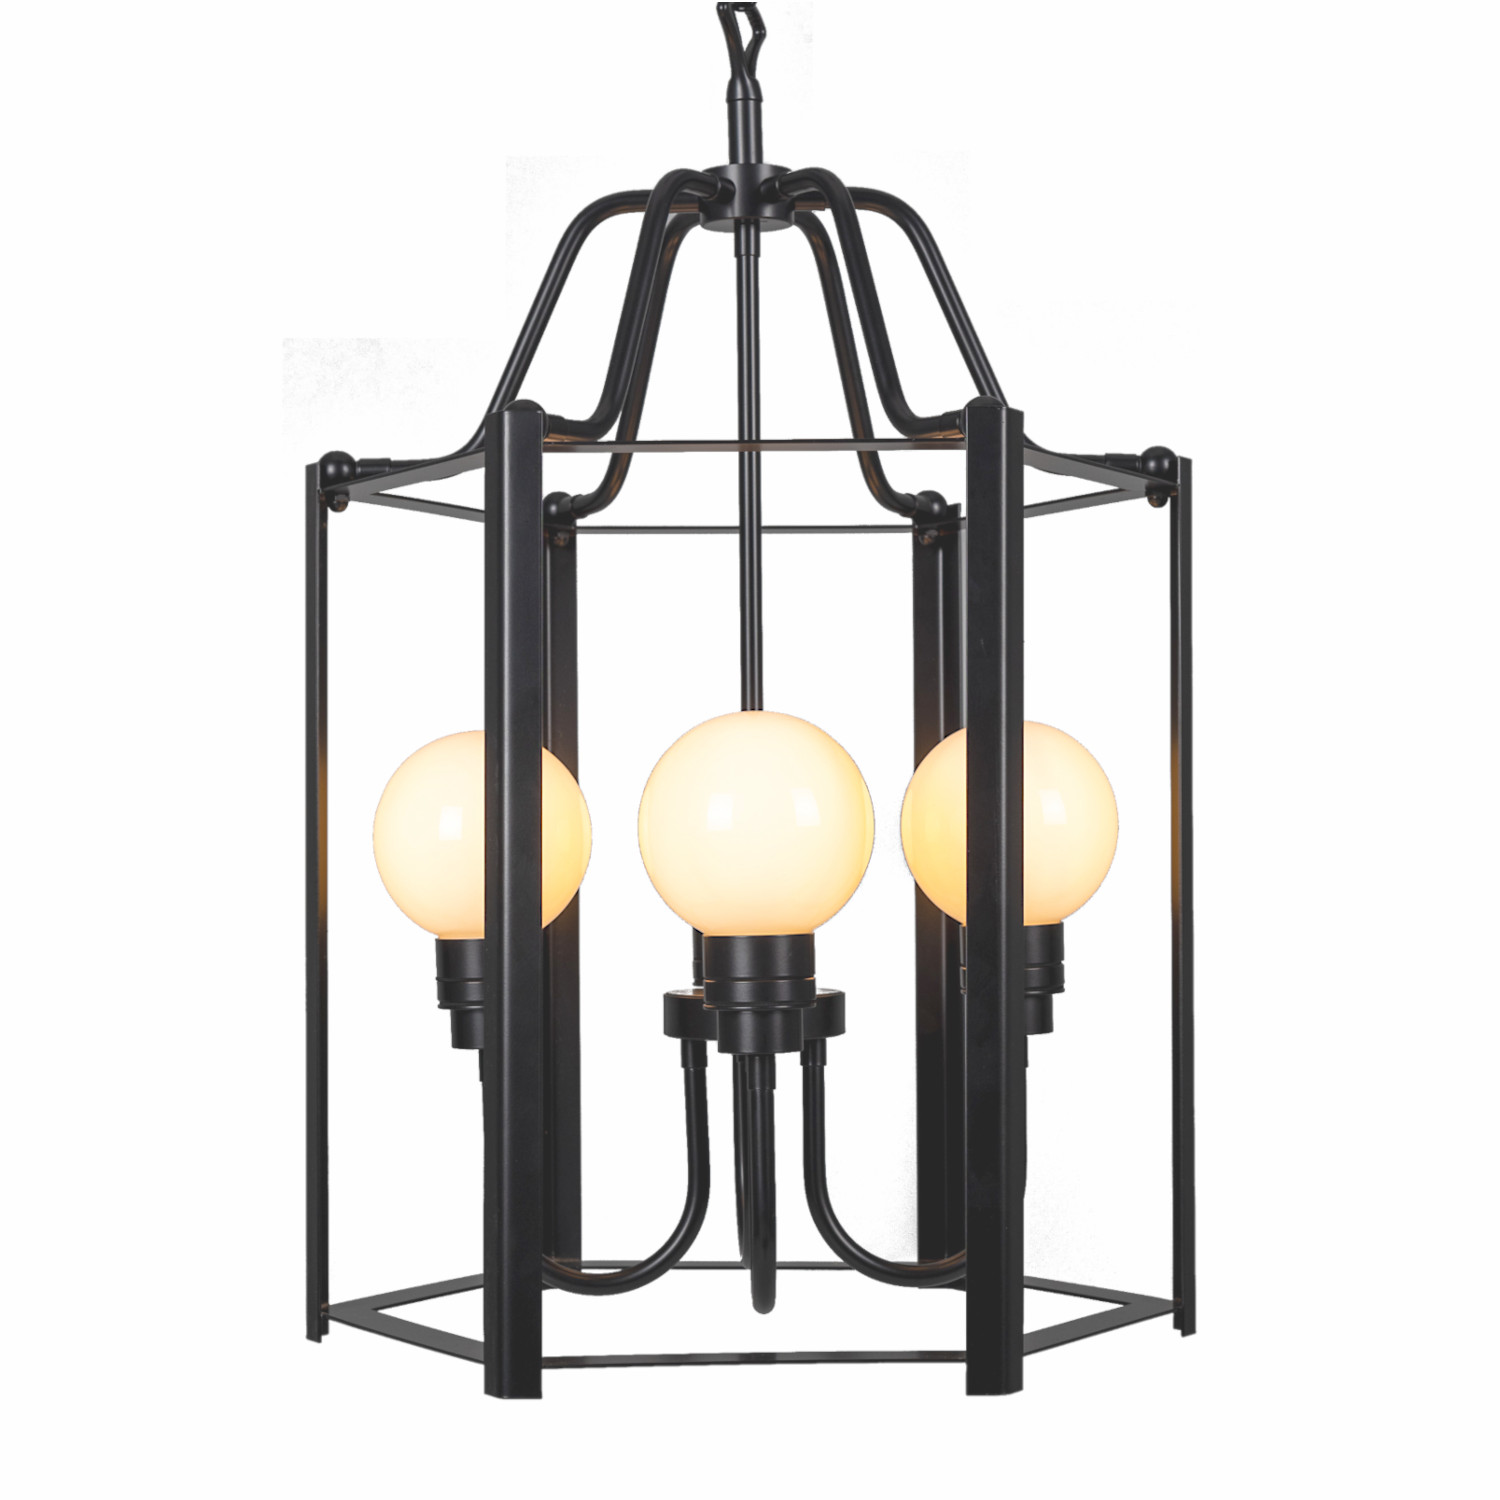 Four-arm pendant light with six glass options, IP65